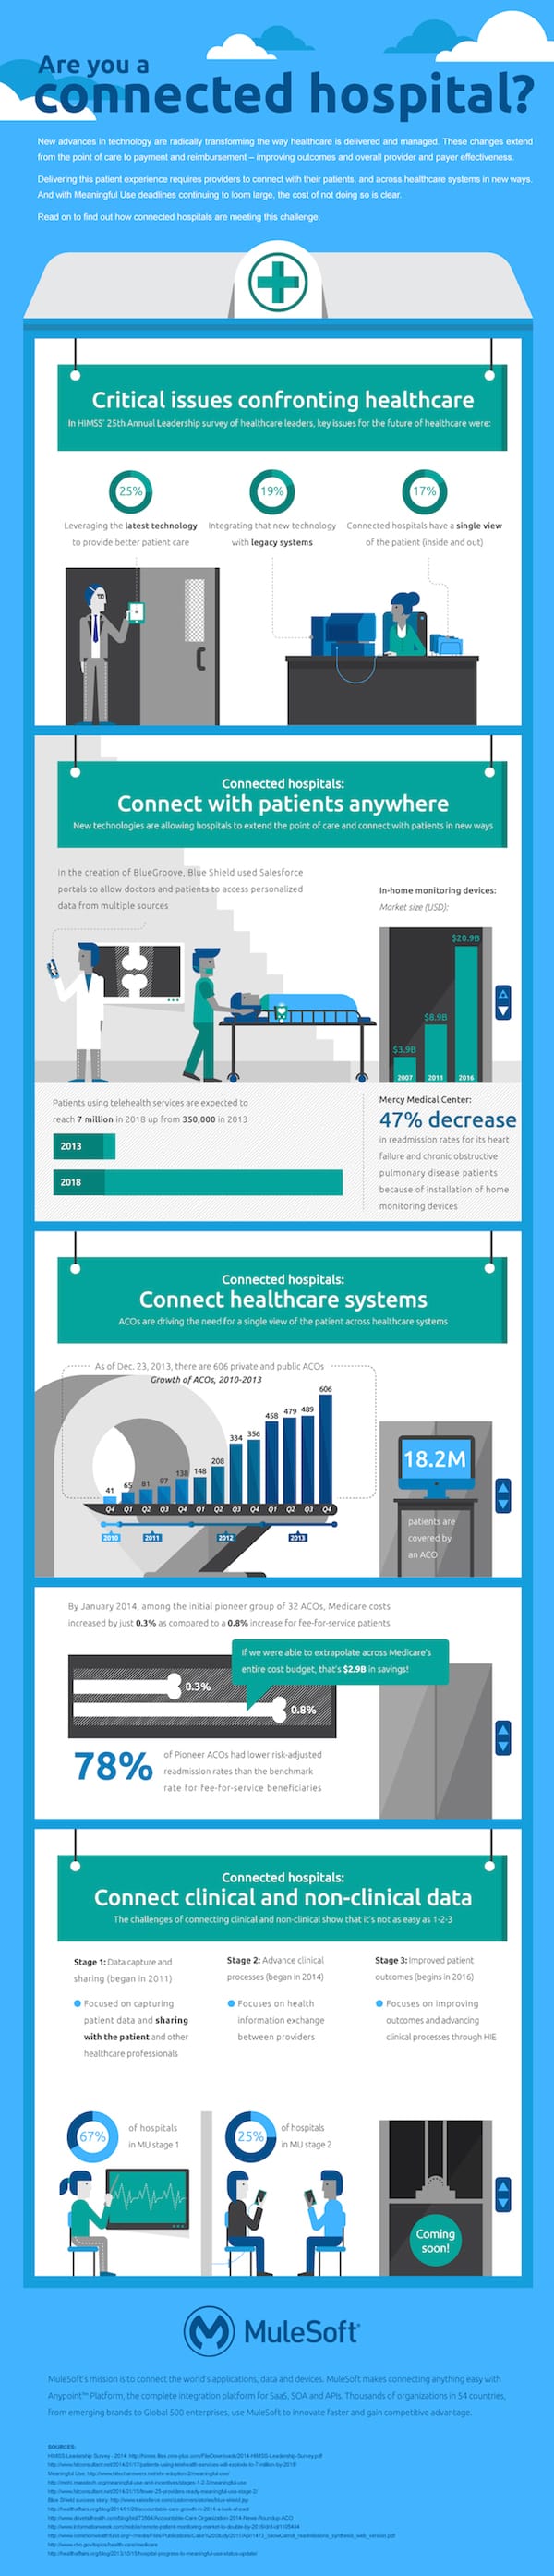 mulesoft healthcare integration solutions